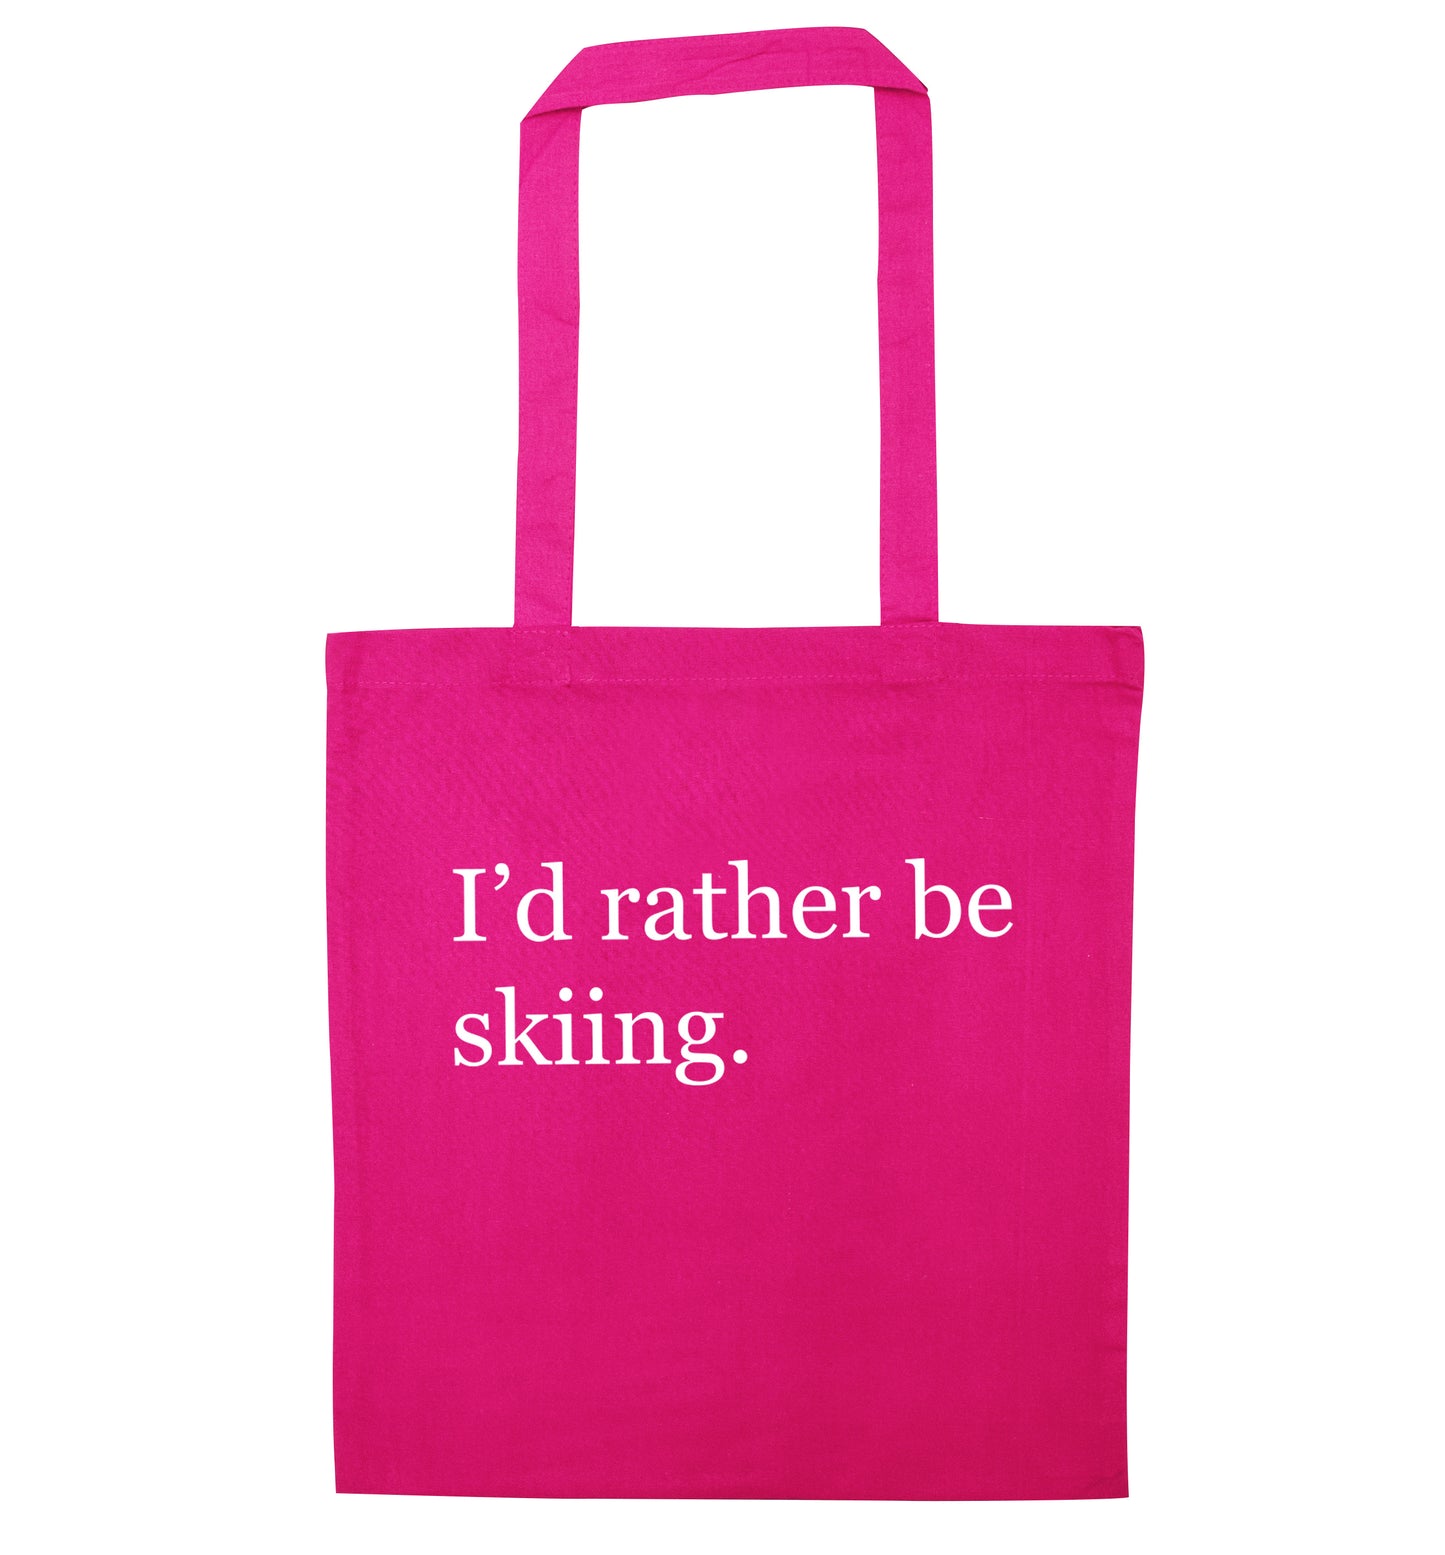 I'd rather be skiing pink tote bag